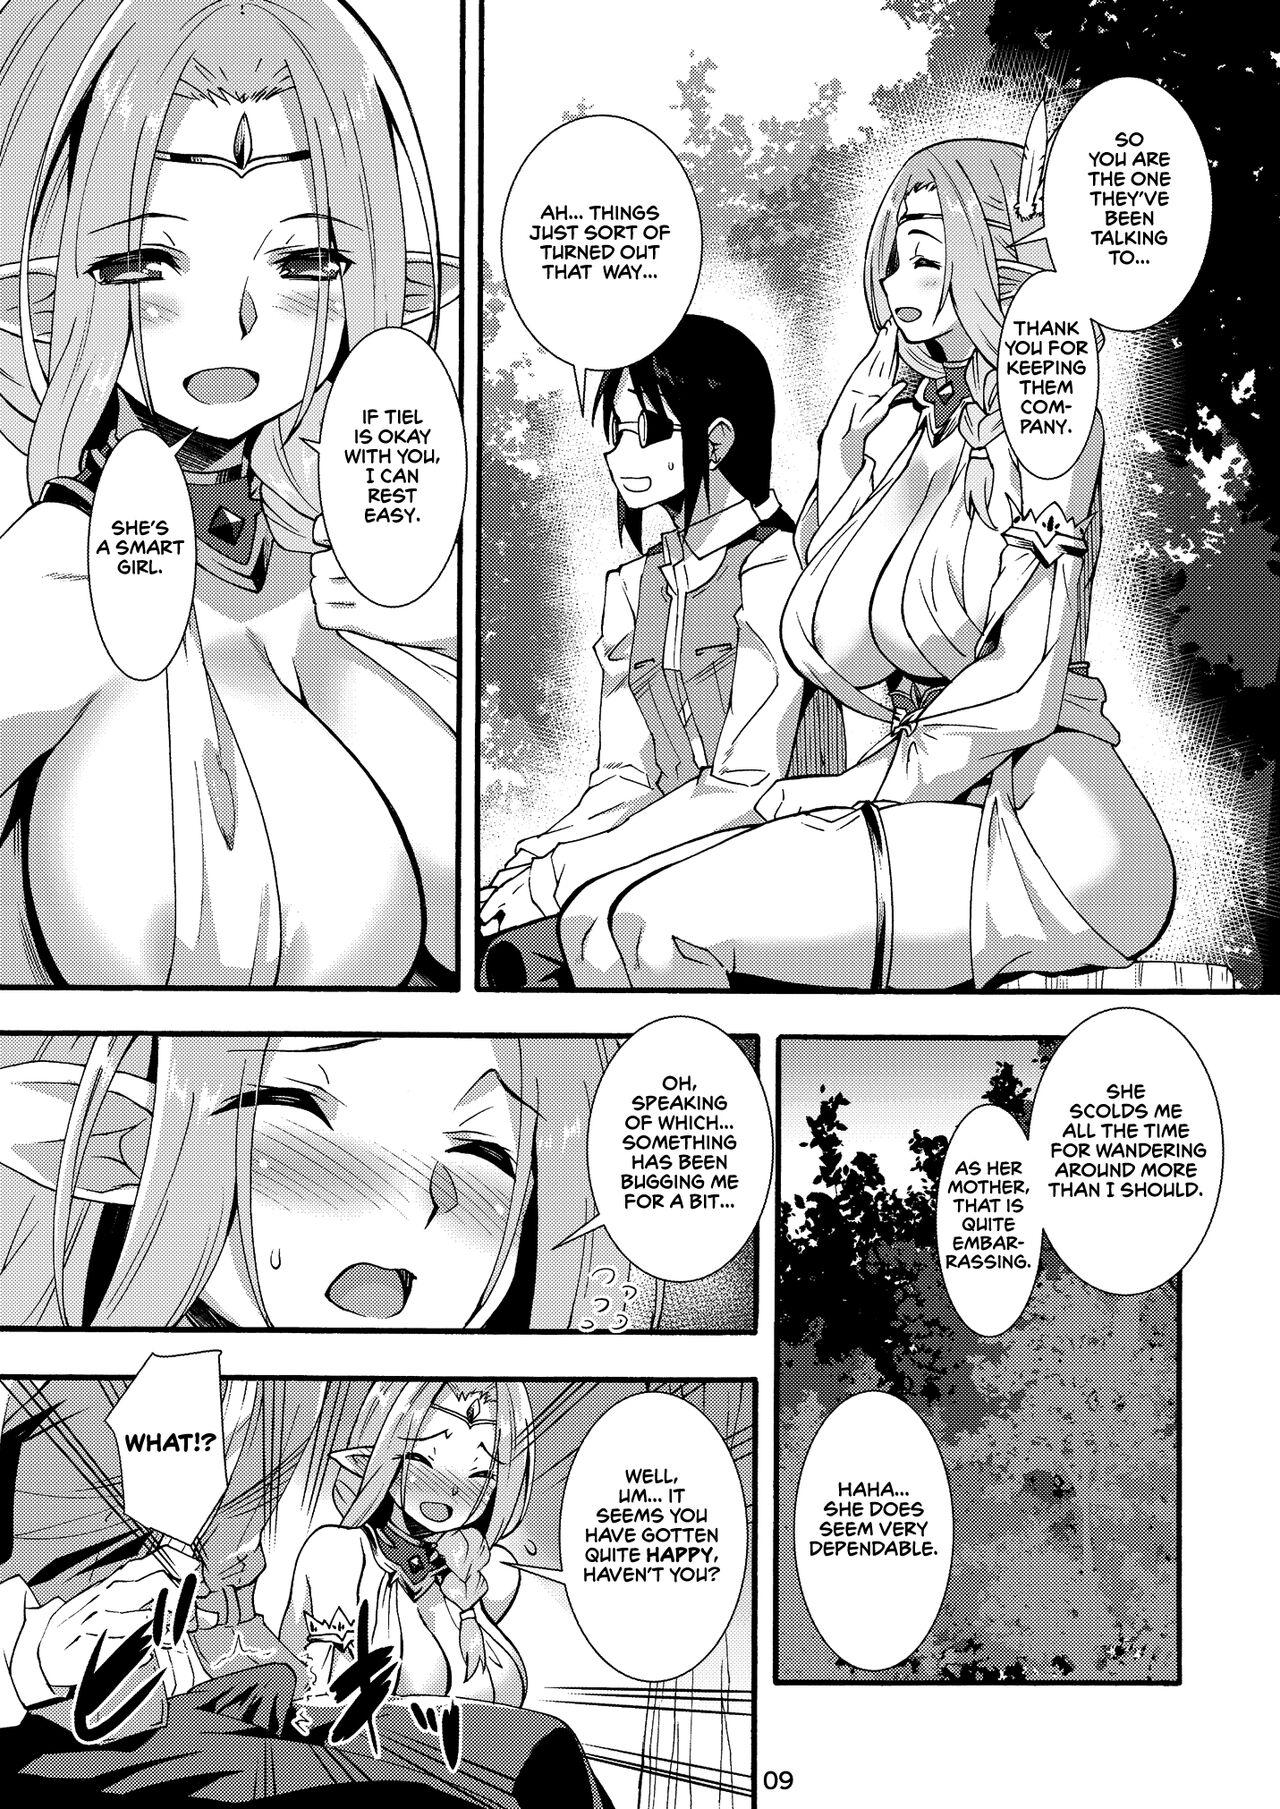 Lolicon Sukebe Elf Tanbouki 3 | Records of the Search for the Lustful Elves 3 - Original Suruba - Page 9